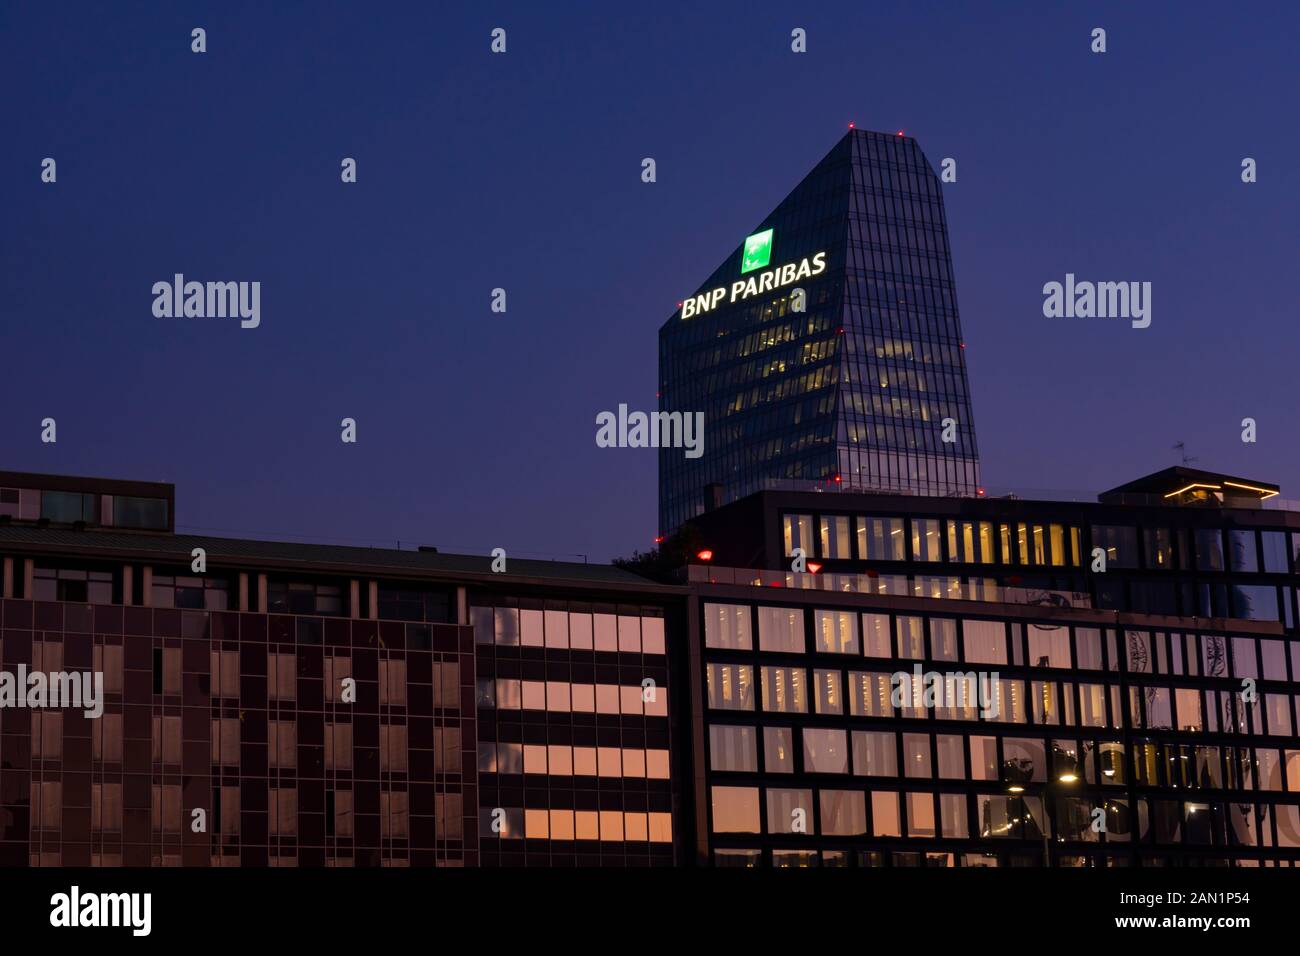 Glass building headquarters of the French bank BNP Paribas with the logo sign illuminated at sunset. Milan, Italy. Stock Photo